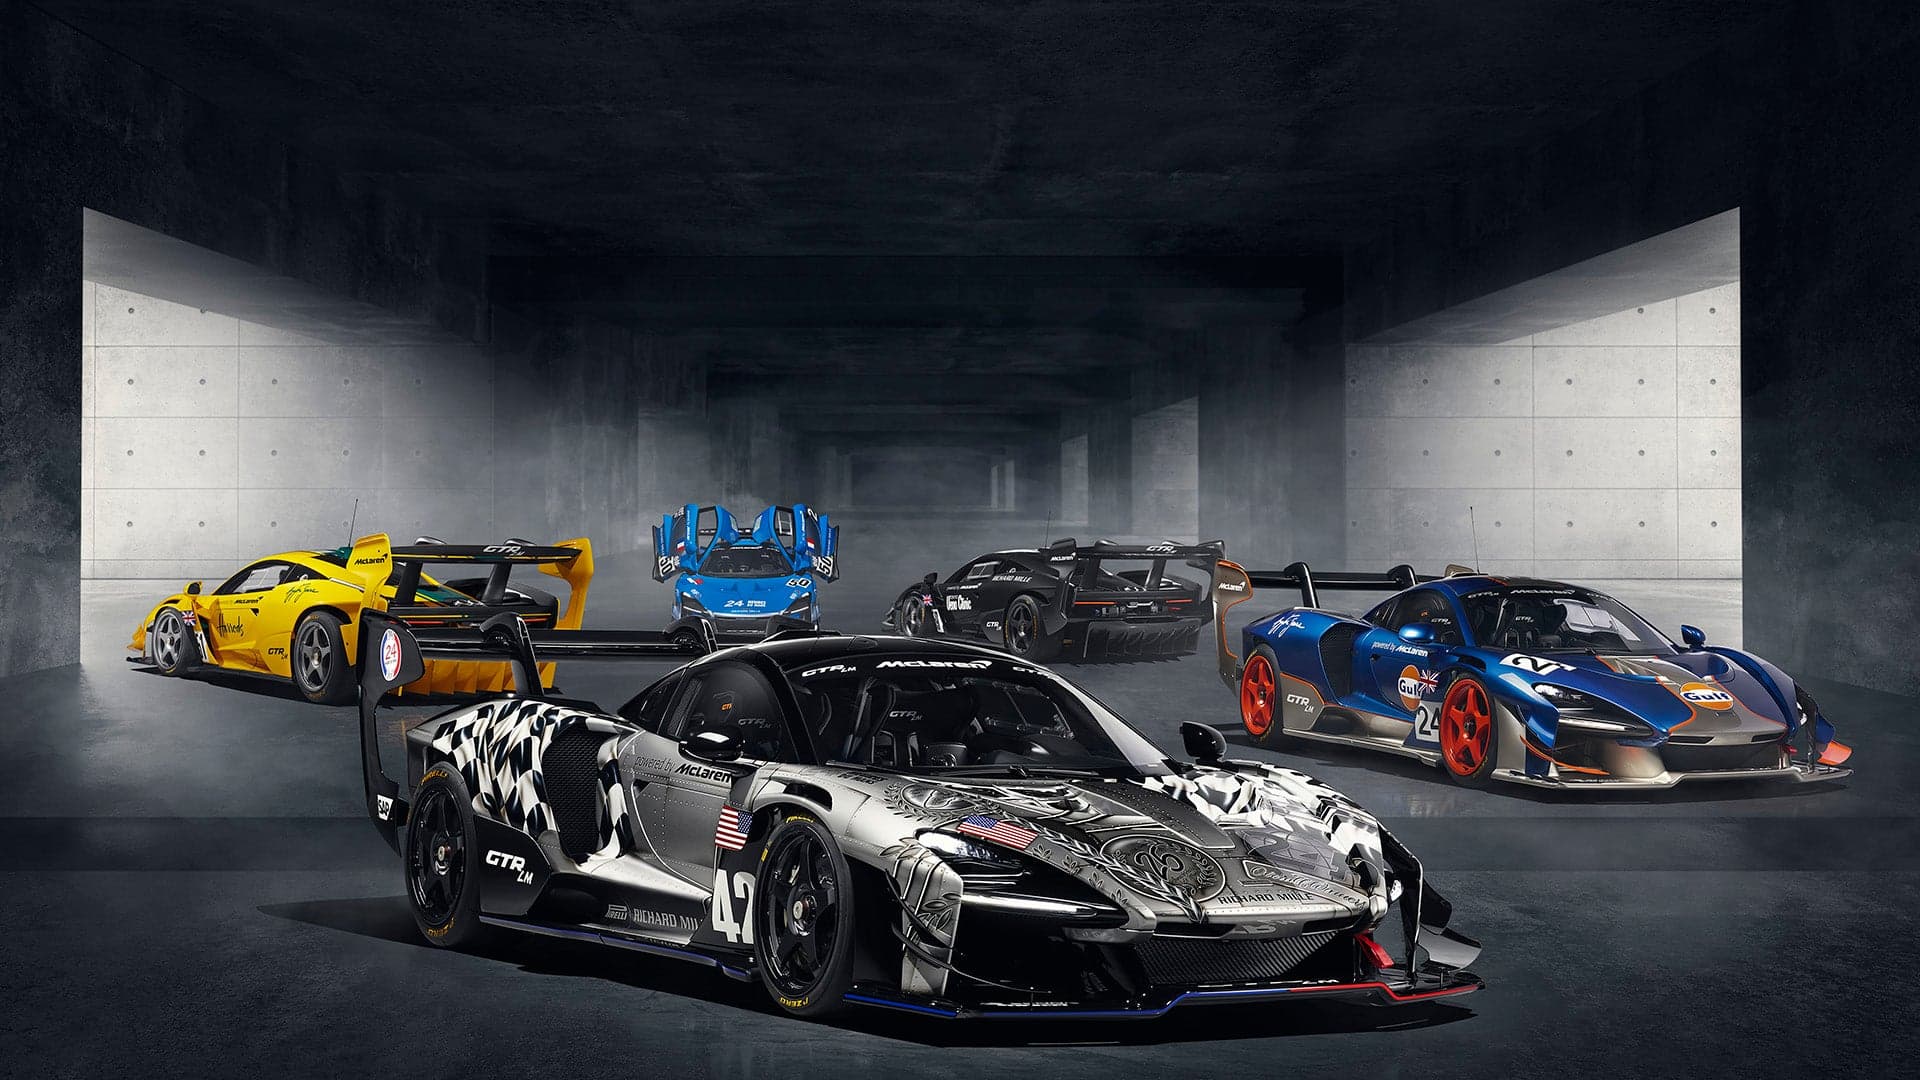 McLaren Celebrates 1995 Le Mans Dominance With Some Really Out There Senna GTR LMs